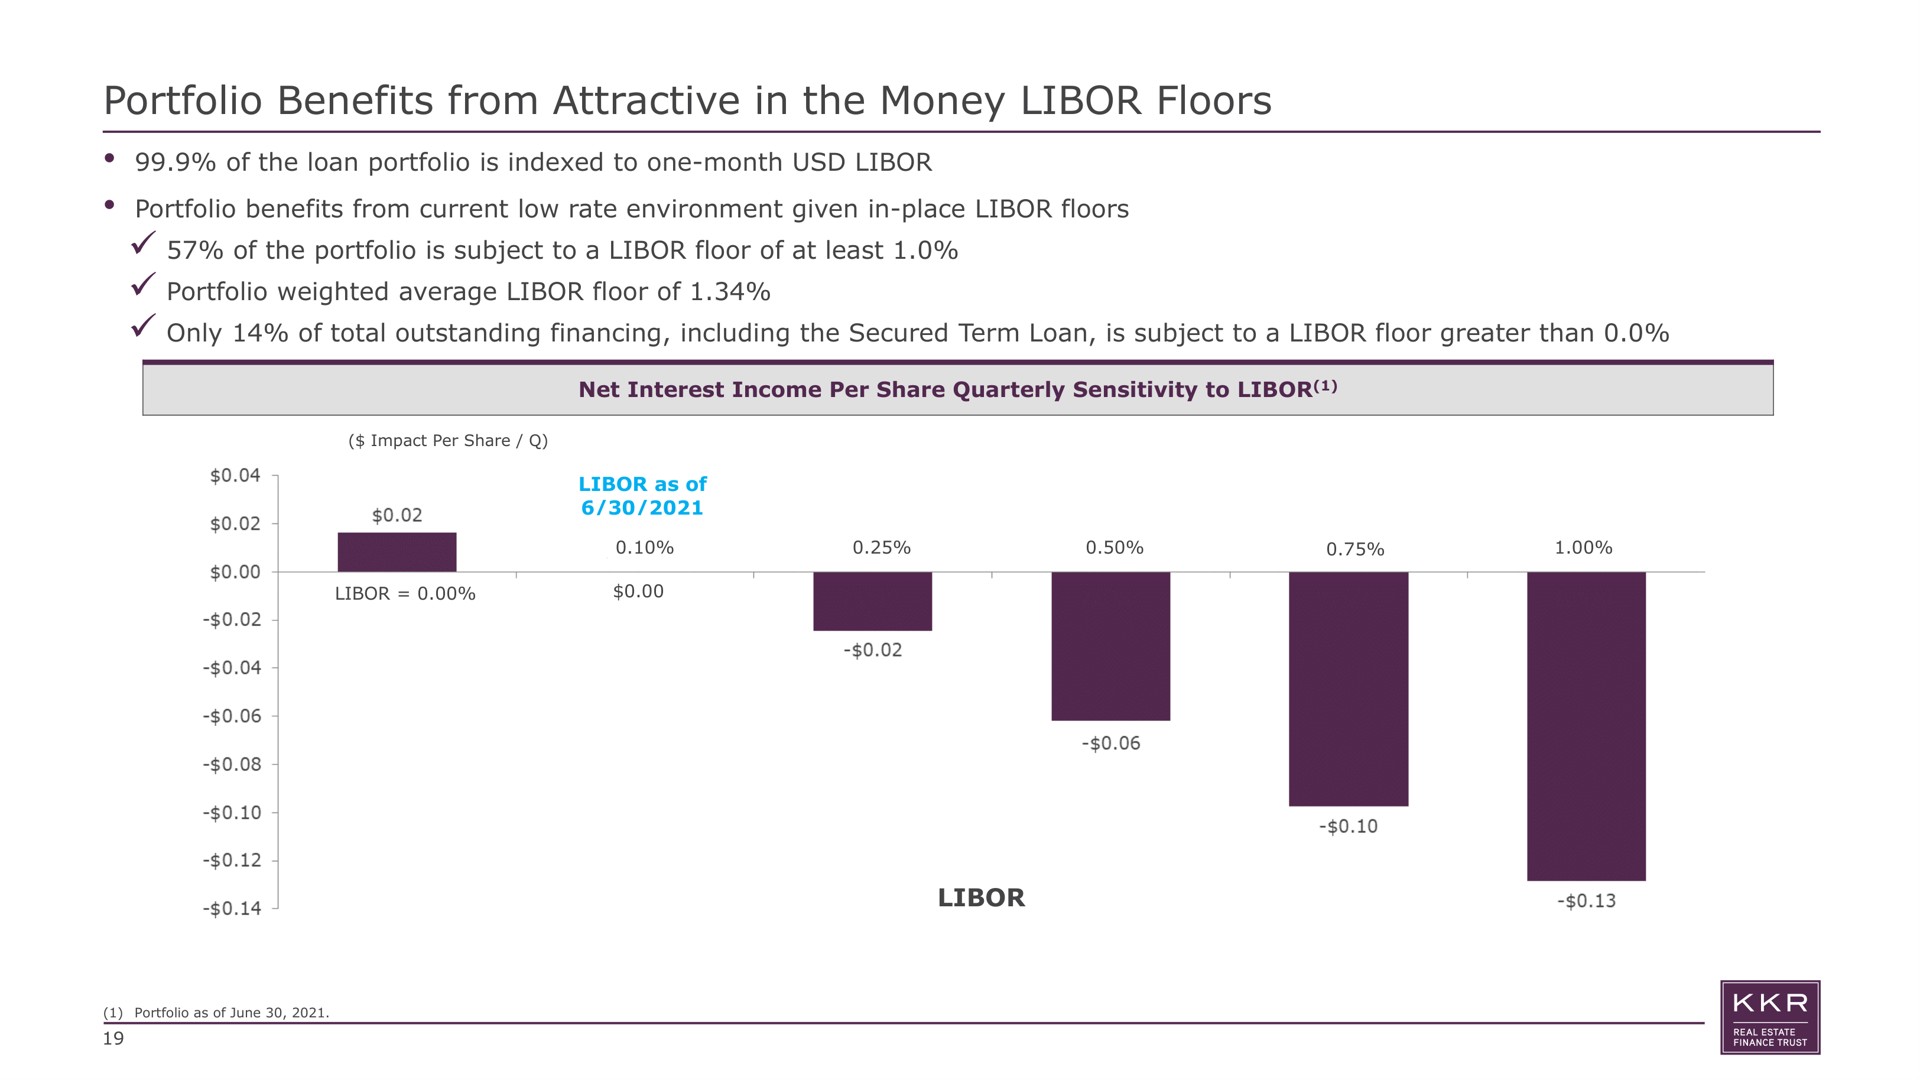 portfolio benefits from attractive in the money floors of the loan portfolio is indexed to one month portfolio benefits from current low rate environment given in place floors of the portfolio is subject to a floor of at least portfolio weighted average floor of only of total outstanding financing including the secured term loan is subject to a floor greater than net interest income per share quarterly sensitivity as | KKR Real Estate Finance Trust